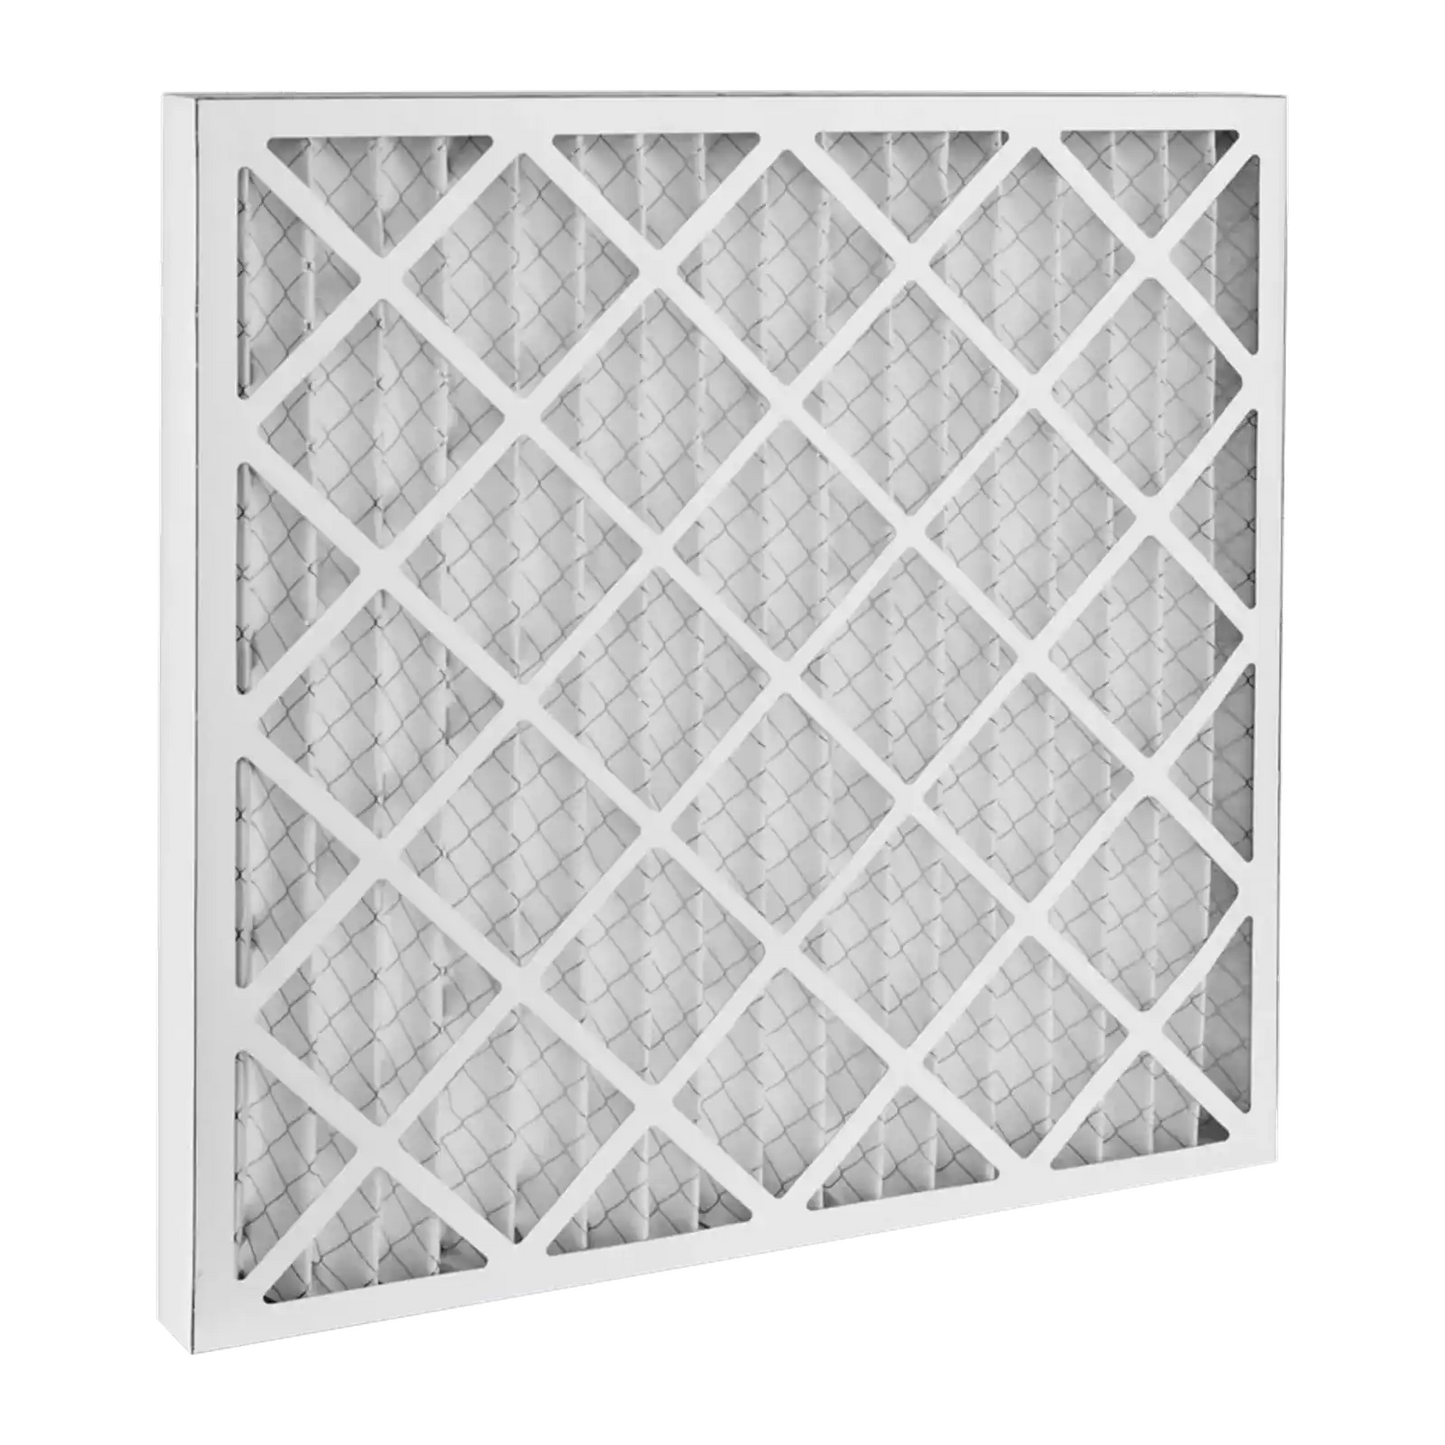 Dafco 18x25x1 Furnace AC Filter - Case of 12